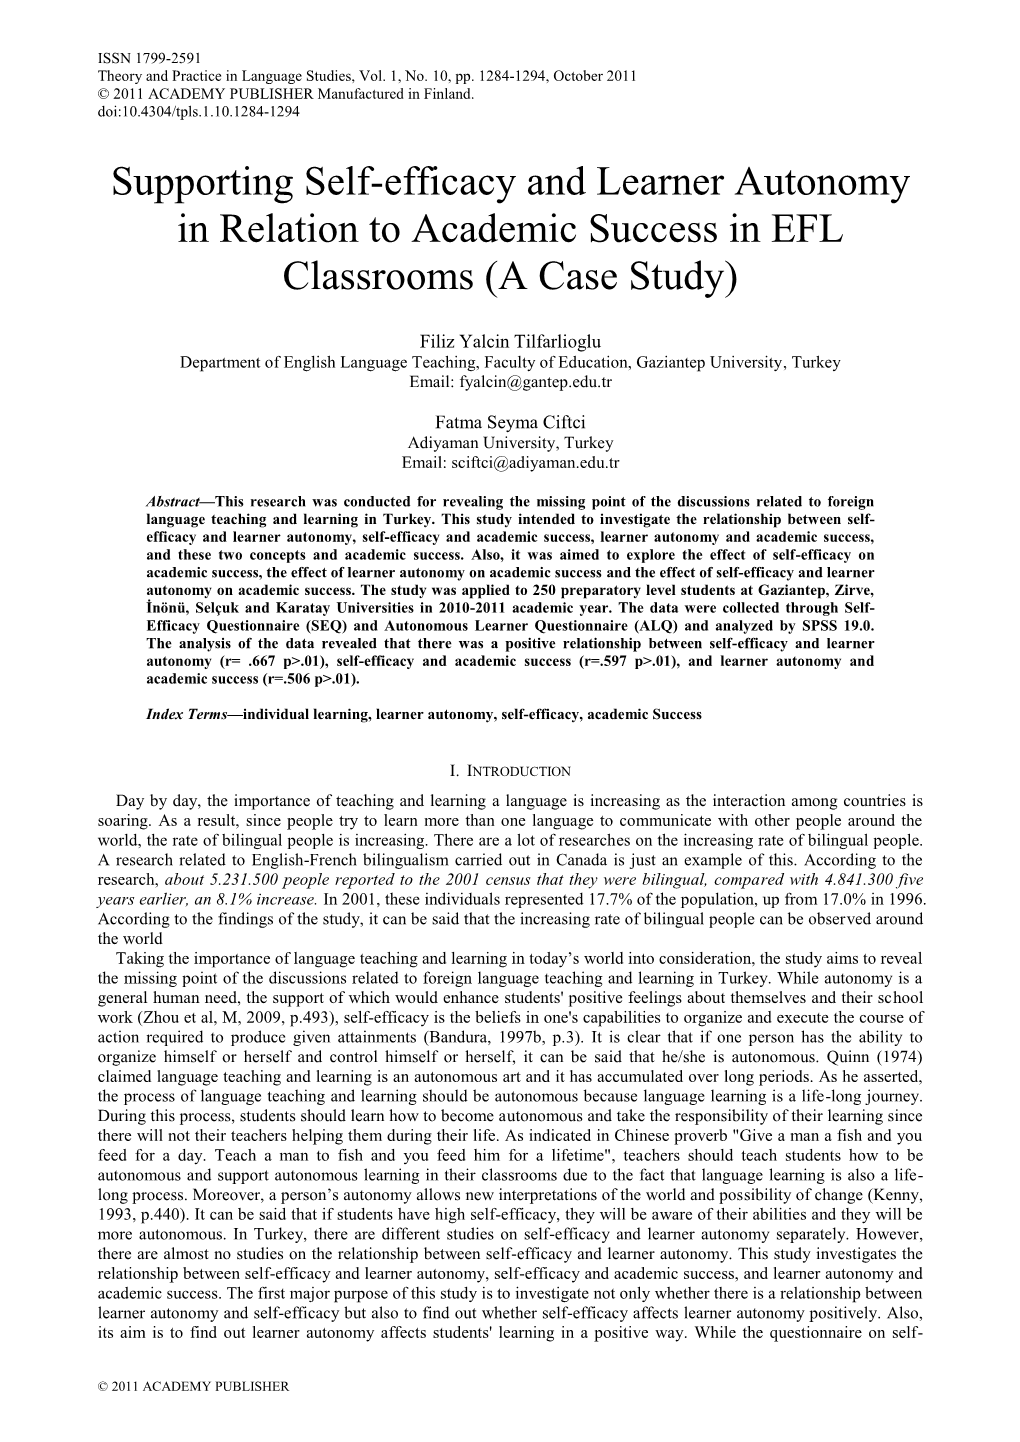 Supporting Self-Efficacy and Learner Autonomy in Relation to Academic Success in EFL Classrooms (A Case Study)